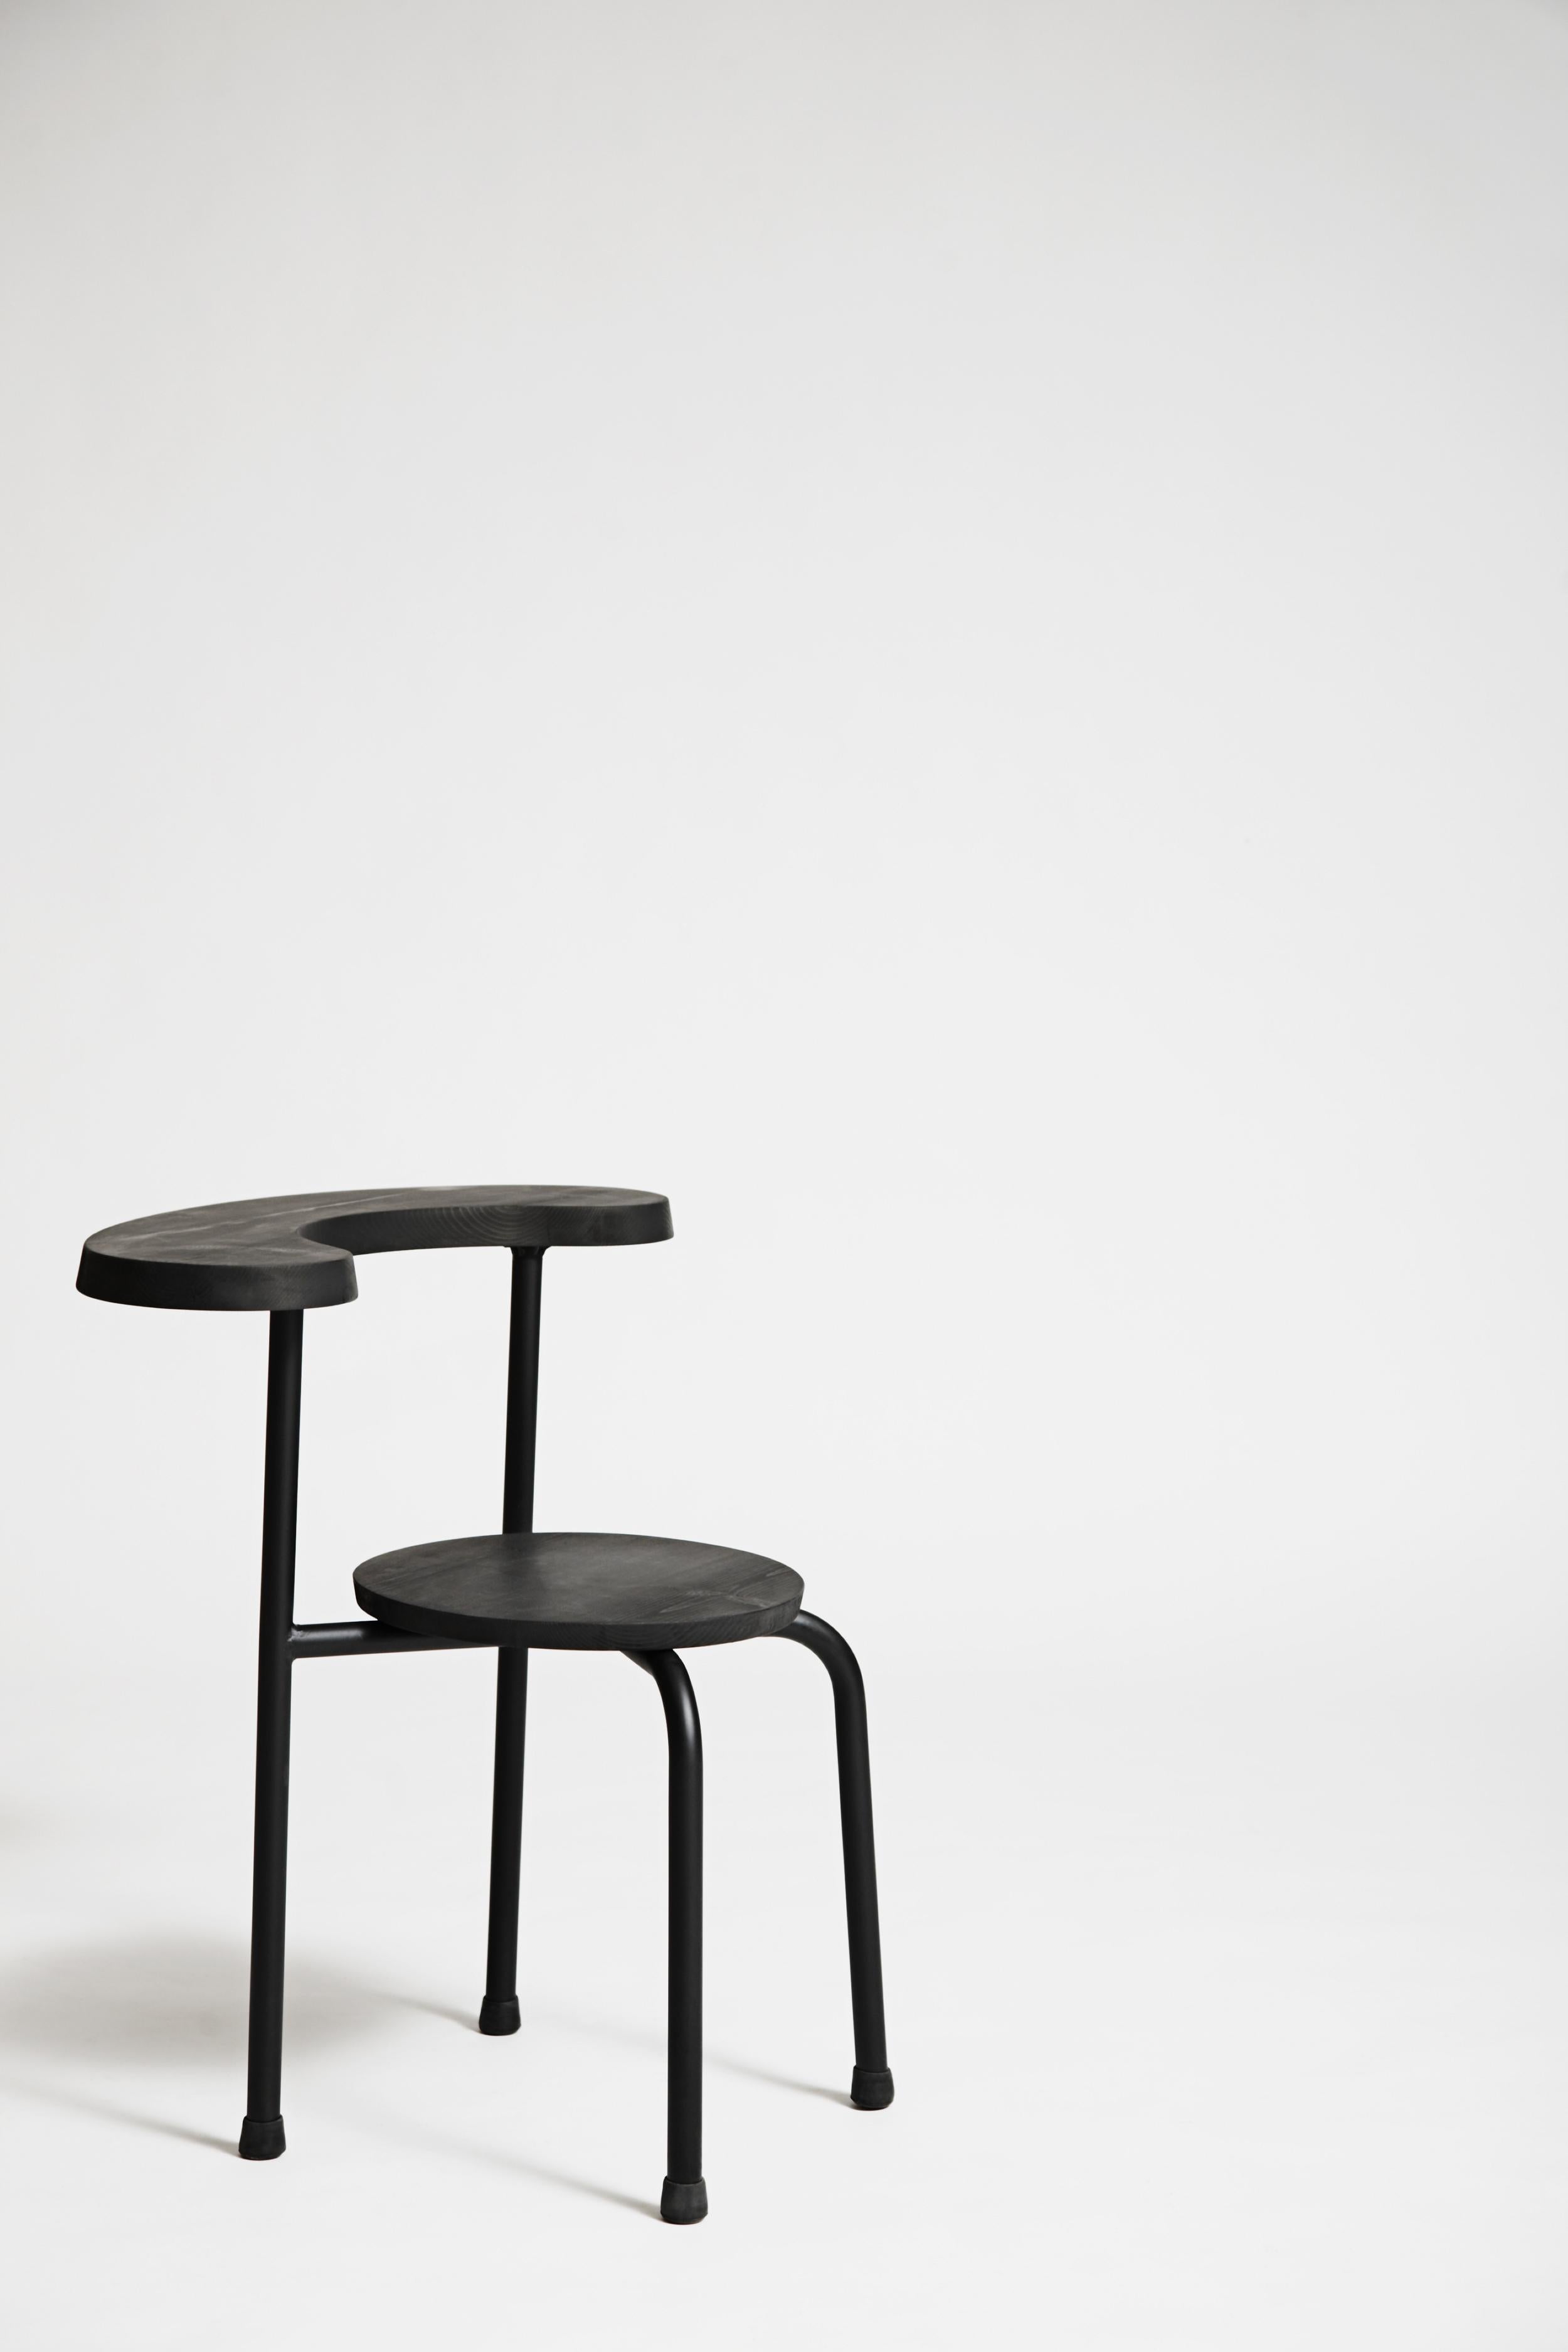 Other Unique Ebonised Bug Stool by Kim Thome